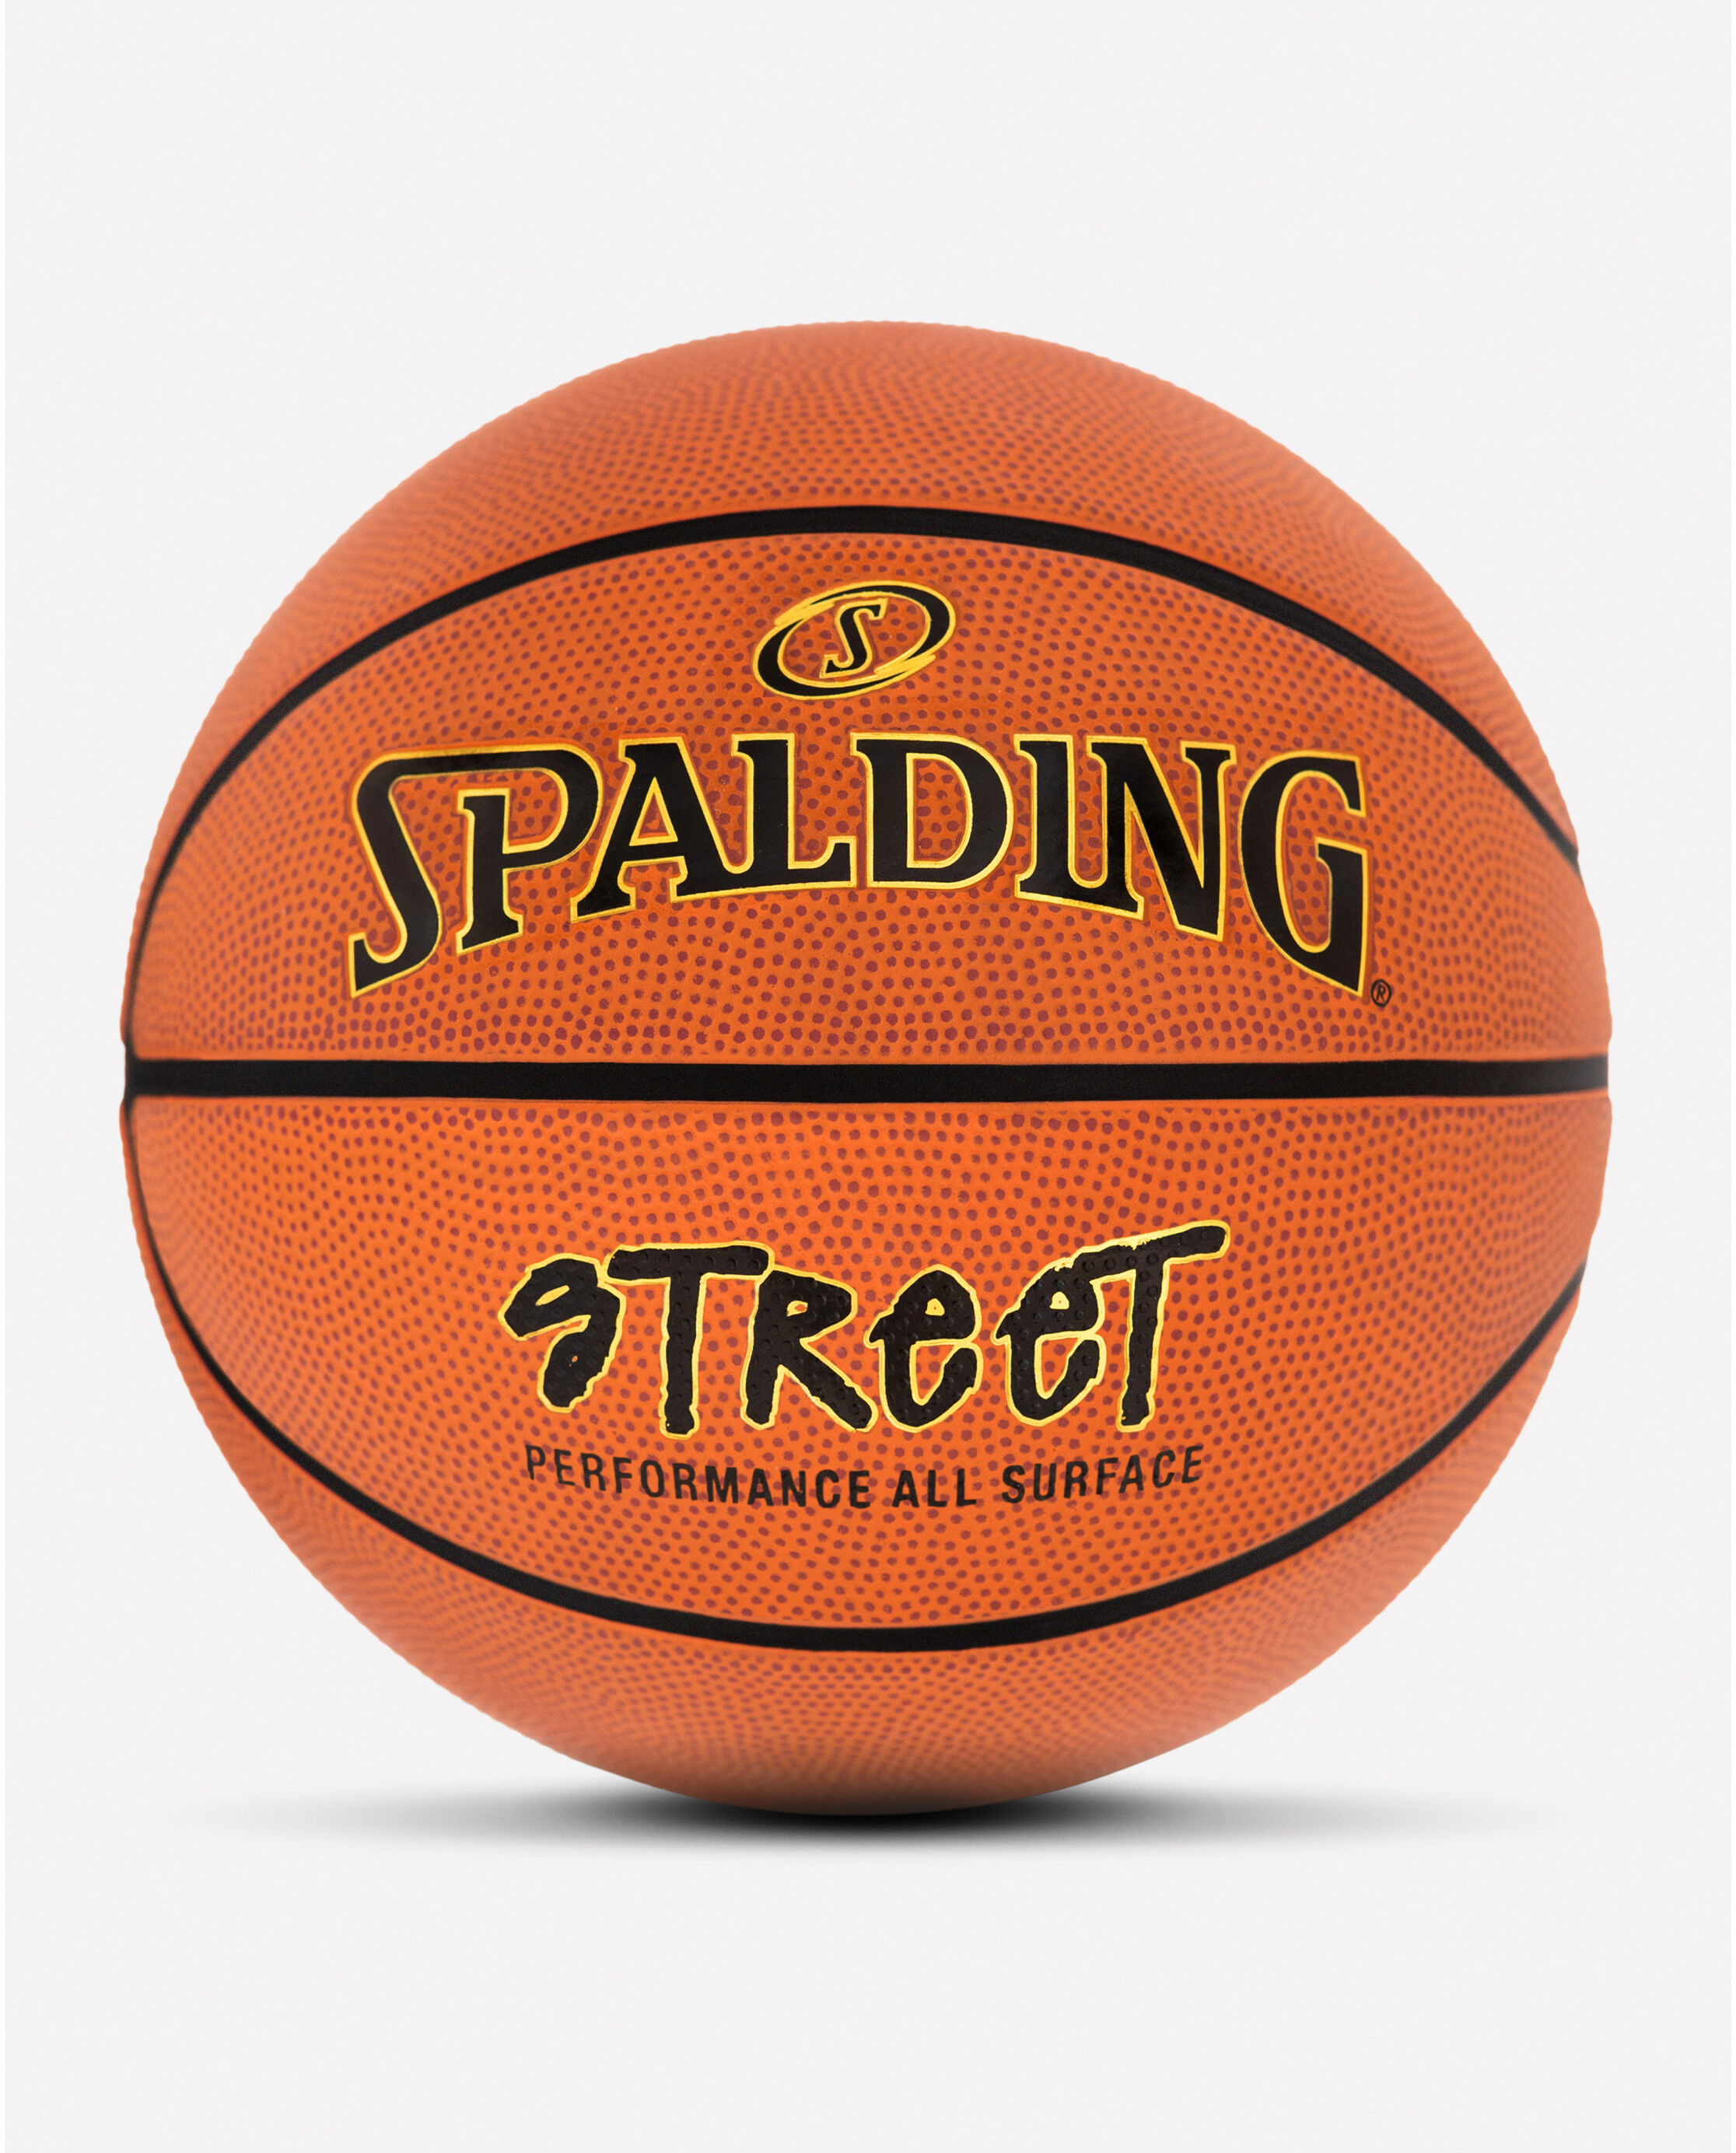 HIGH QUALITY/FREE SHIPPING Spalding Elevation 29.5 Basketball BRAND NEW 